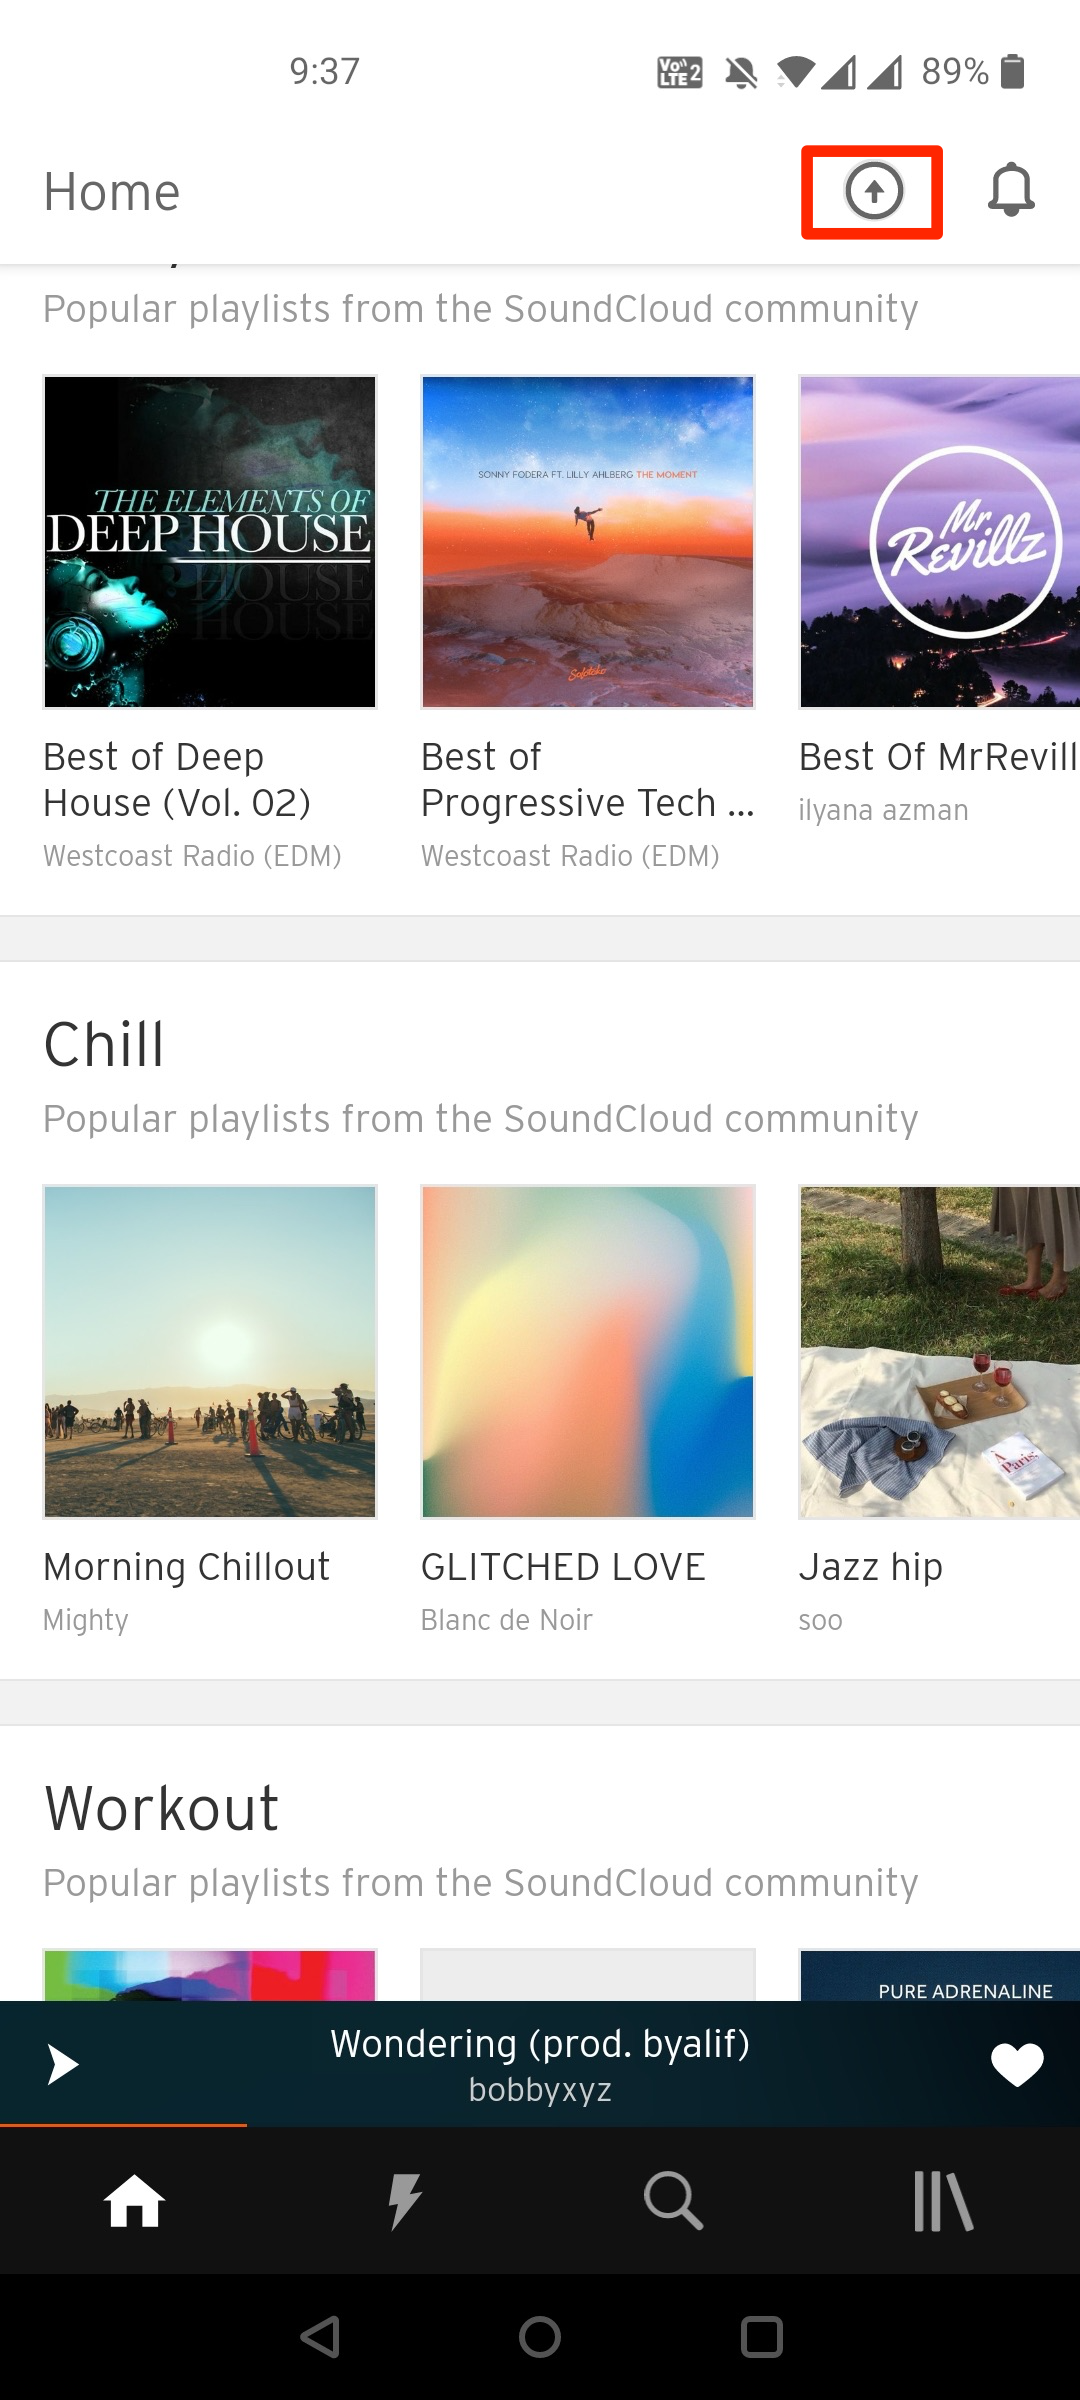 Upload music to SoundCloud using the app